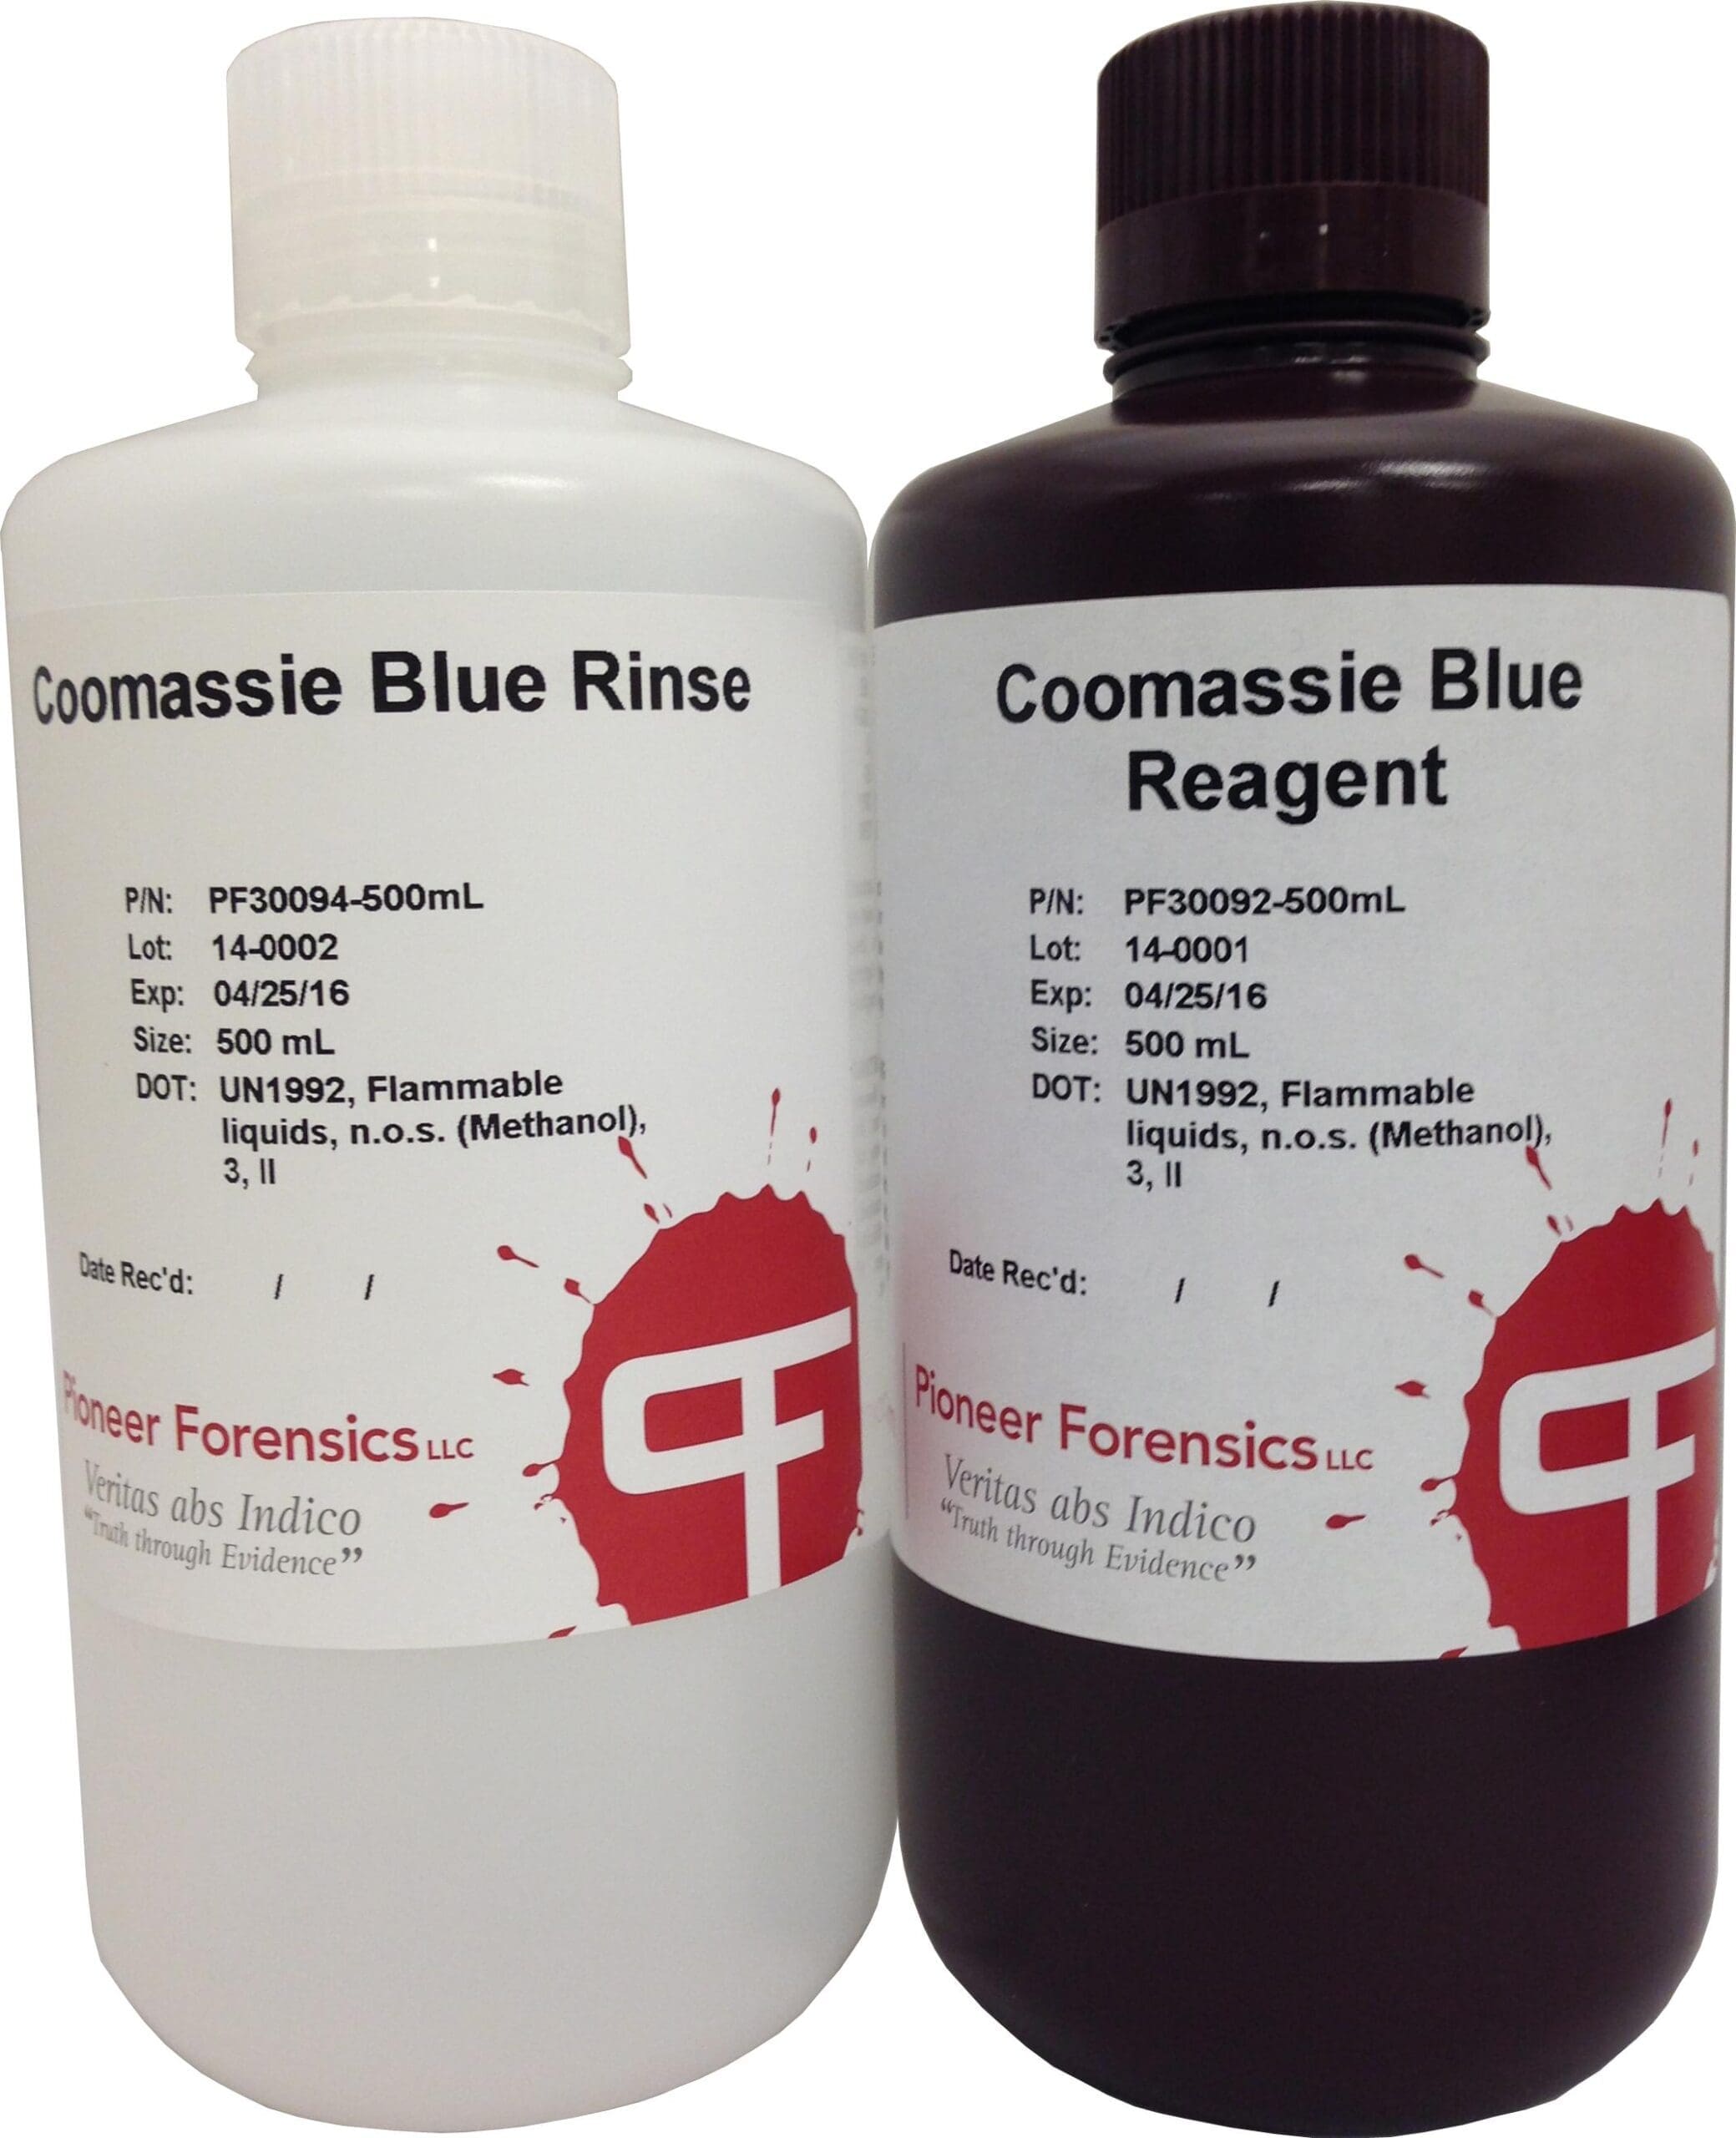 Coomassie Blue is a traditional protein stain used for enhancement of bloody prints.